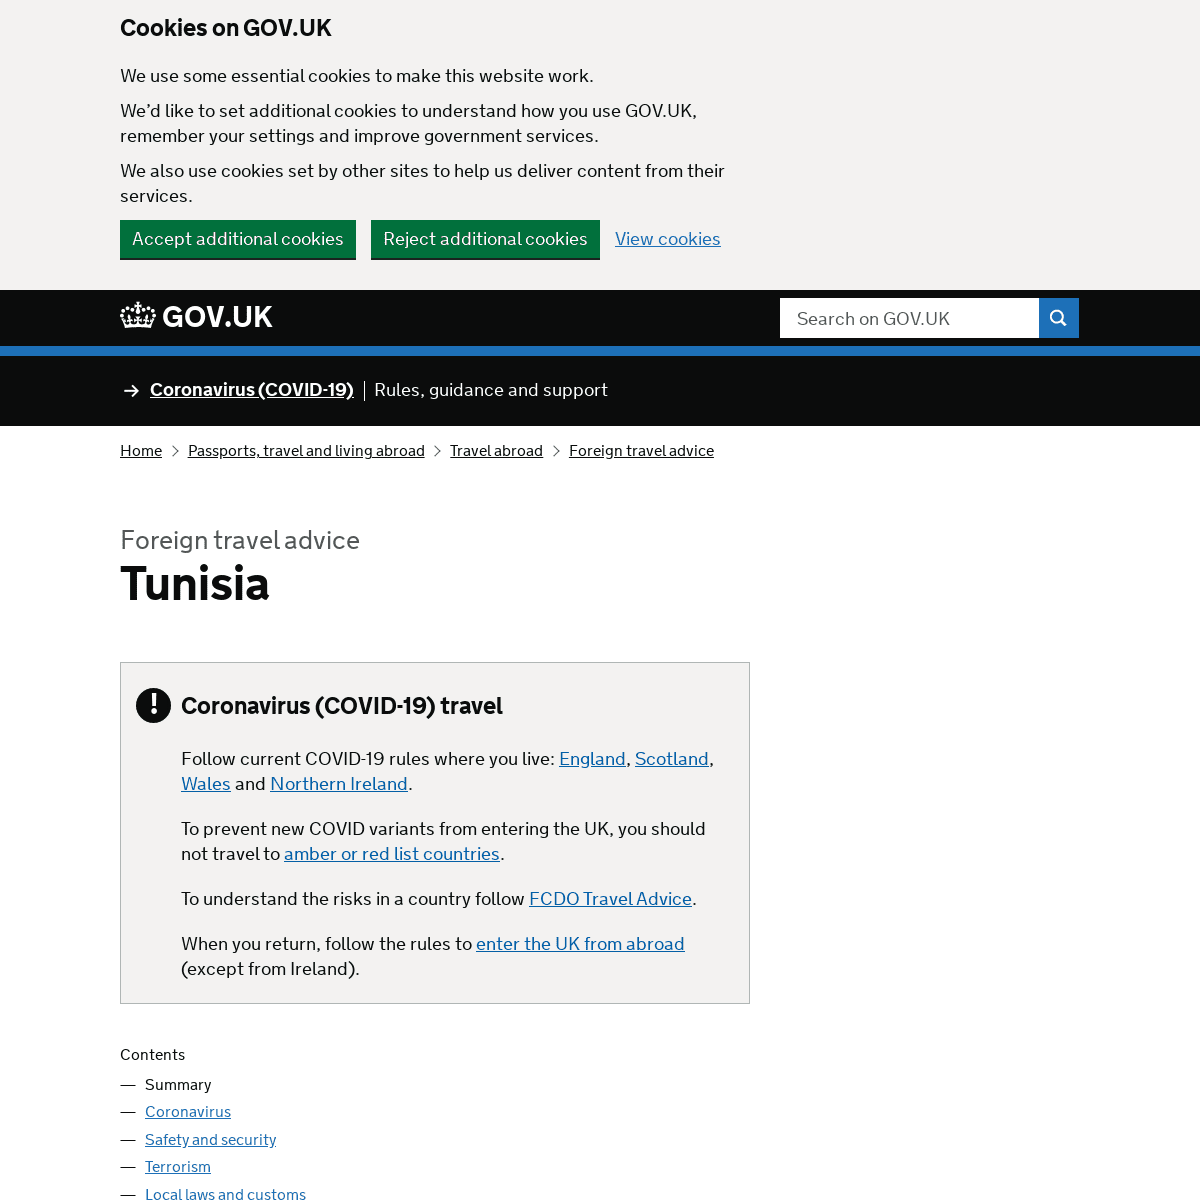 A complete backup of https://www.gov.uk/foreign-travel-advice/tunisia